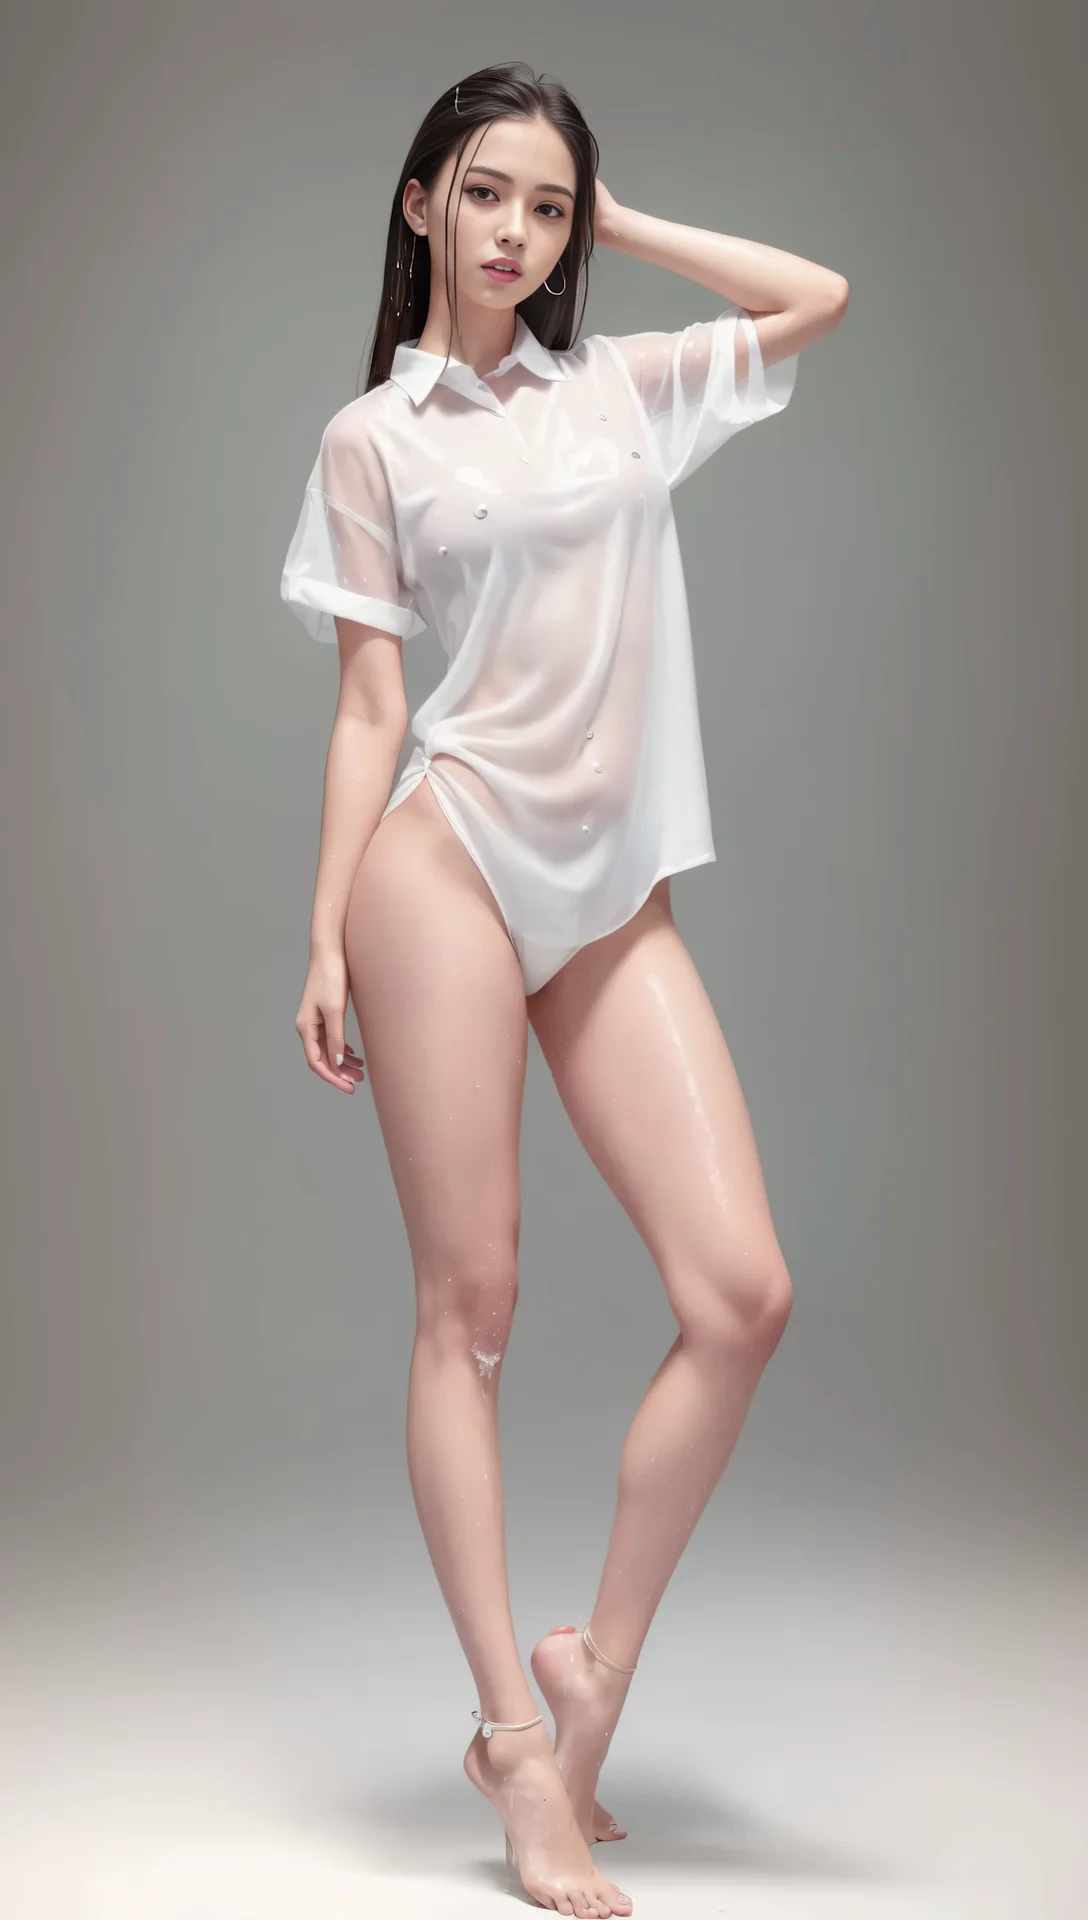 Ai Lookbook Beautiful Girl In A White Shirt And Panties Image 04